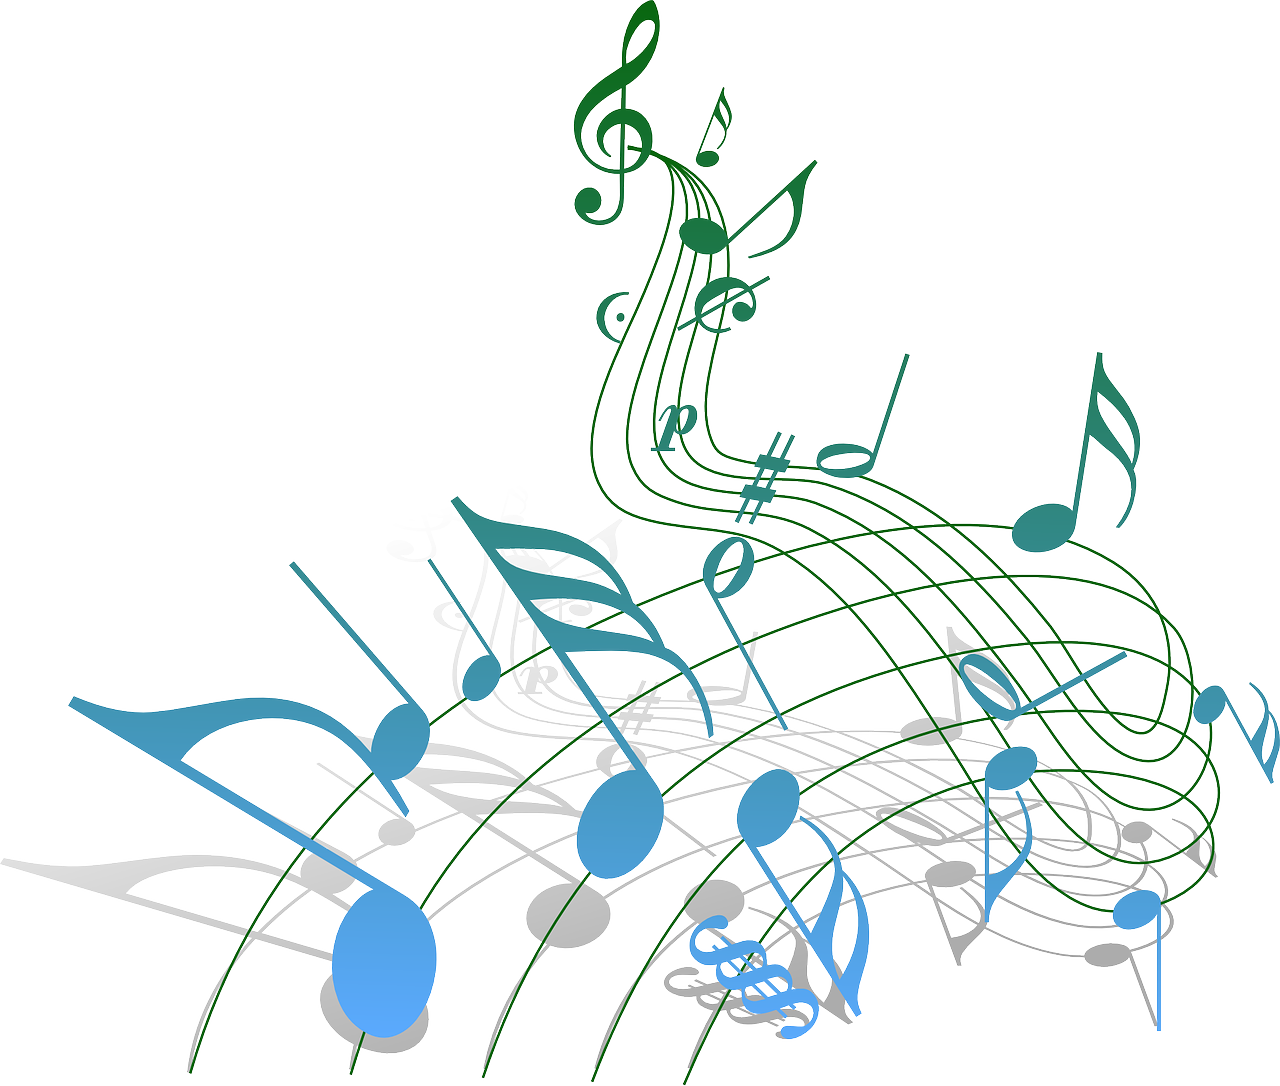 Image of music notes swirling upward. Lowest music notes start blue, ending as green at the top.